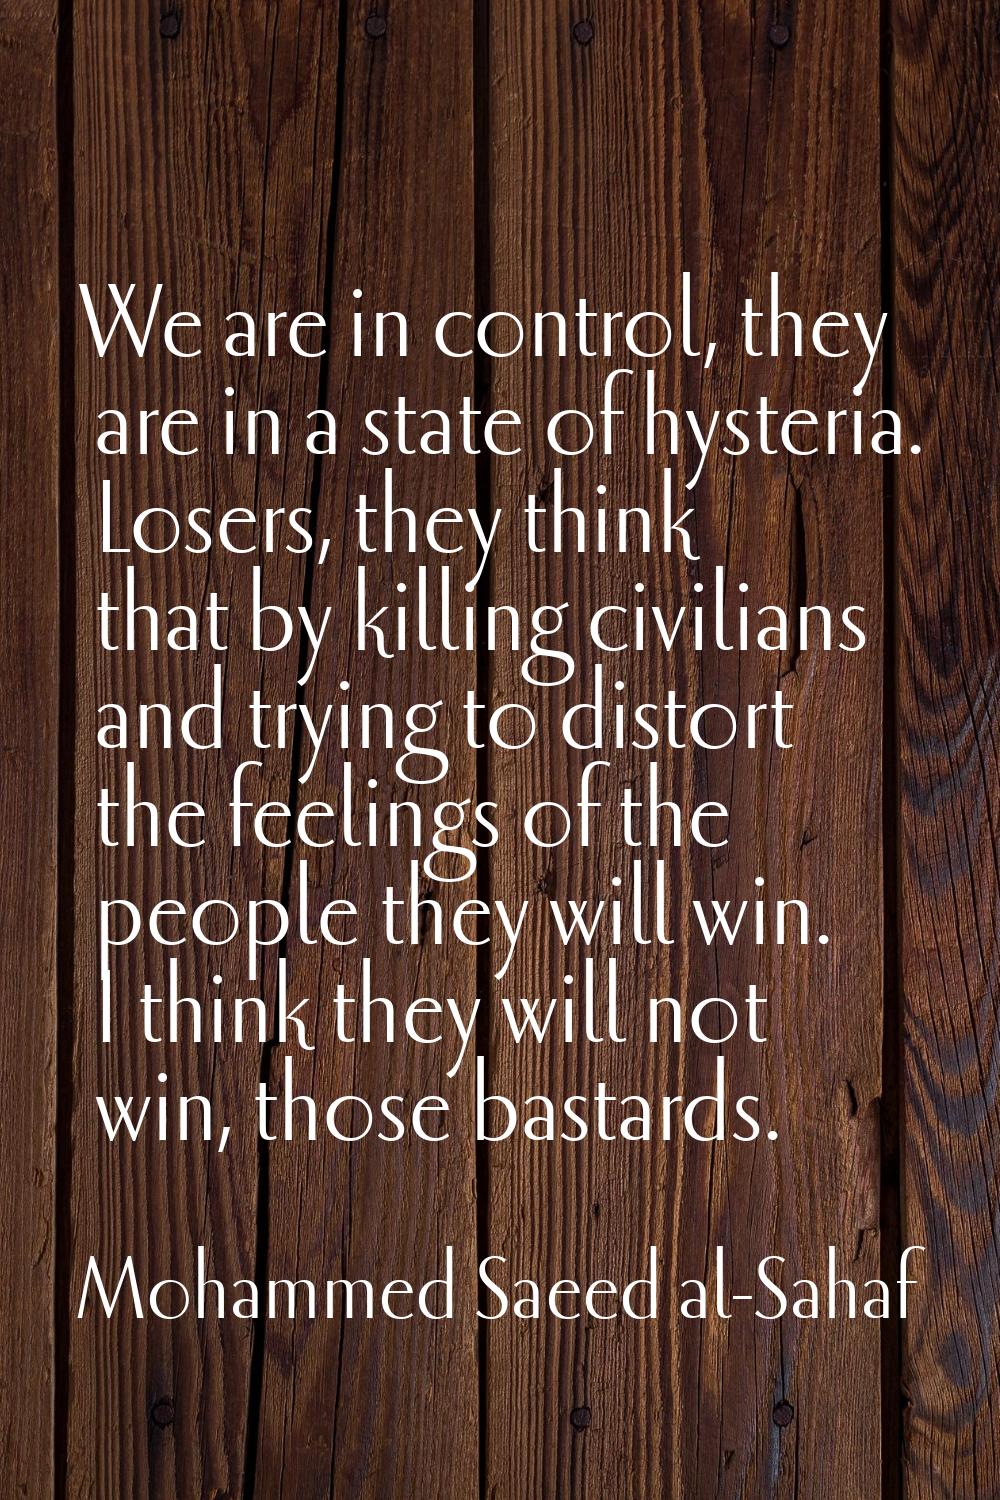 We are in control, they are in a state of hysteria. Losers, they think that by killing civilians an